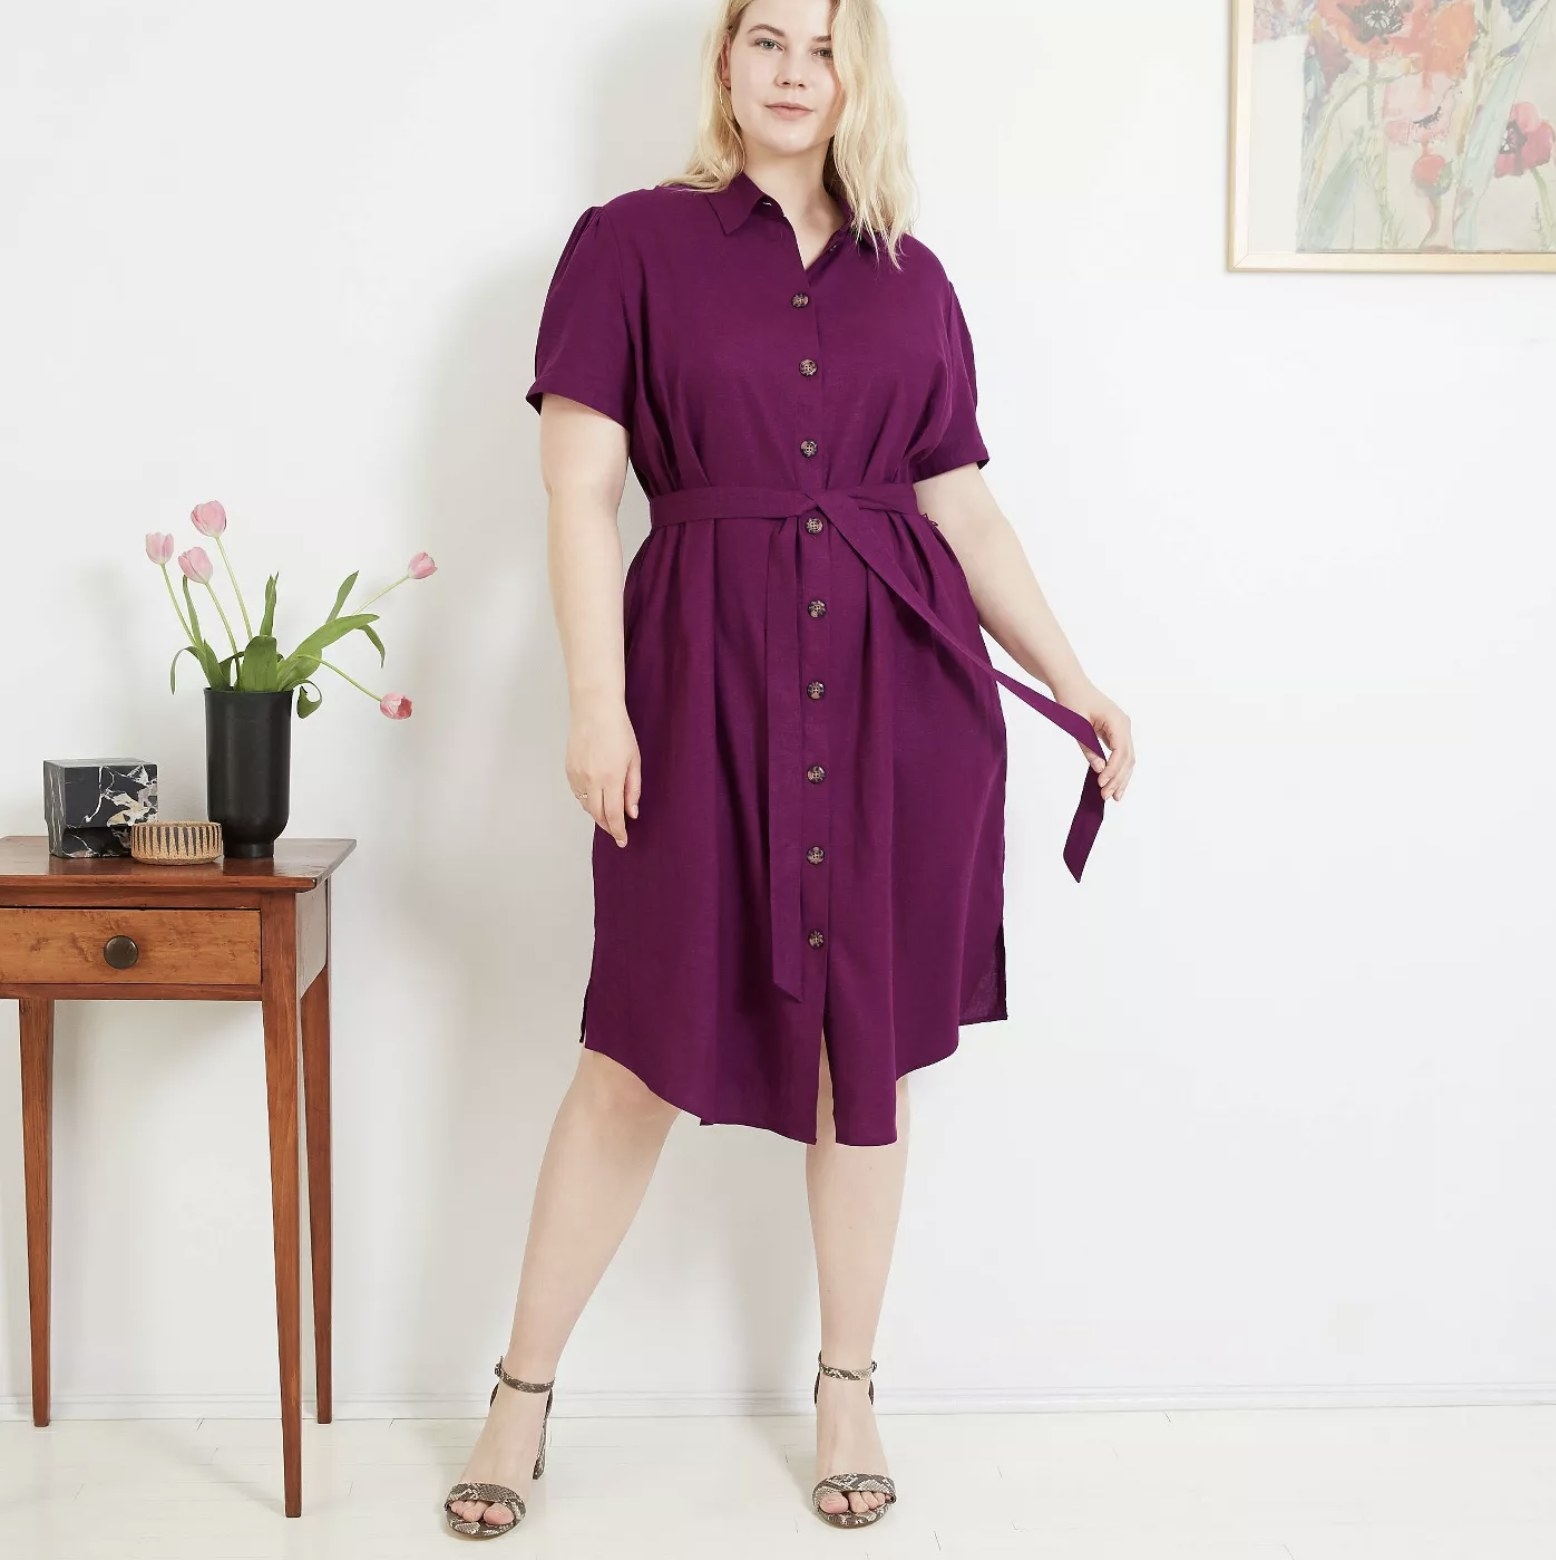 Model wears purple short-sleeve dress with buttons and a tie waist